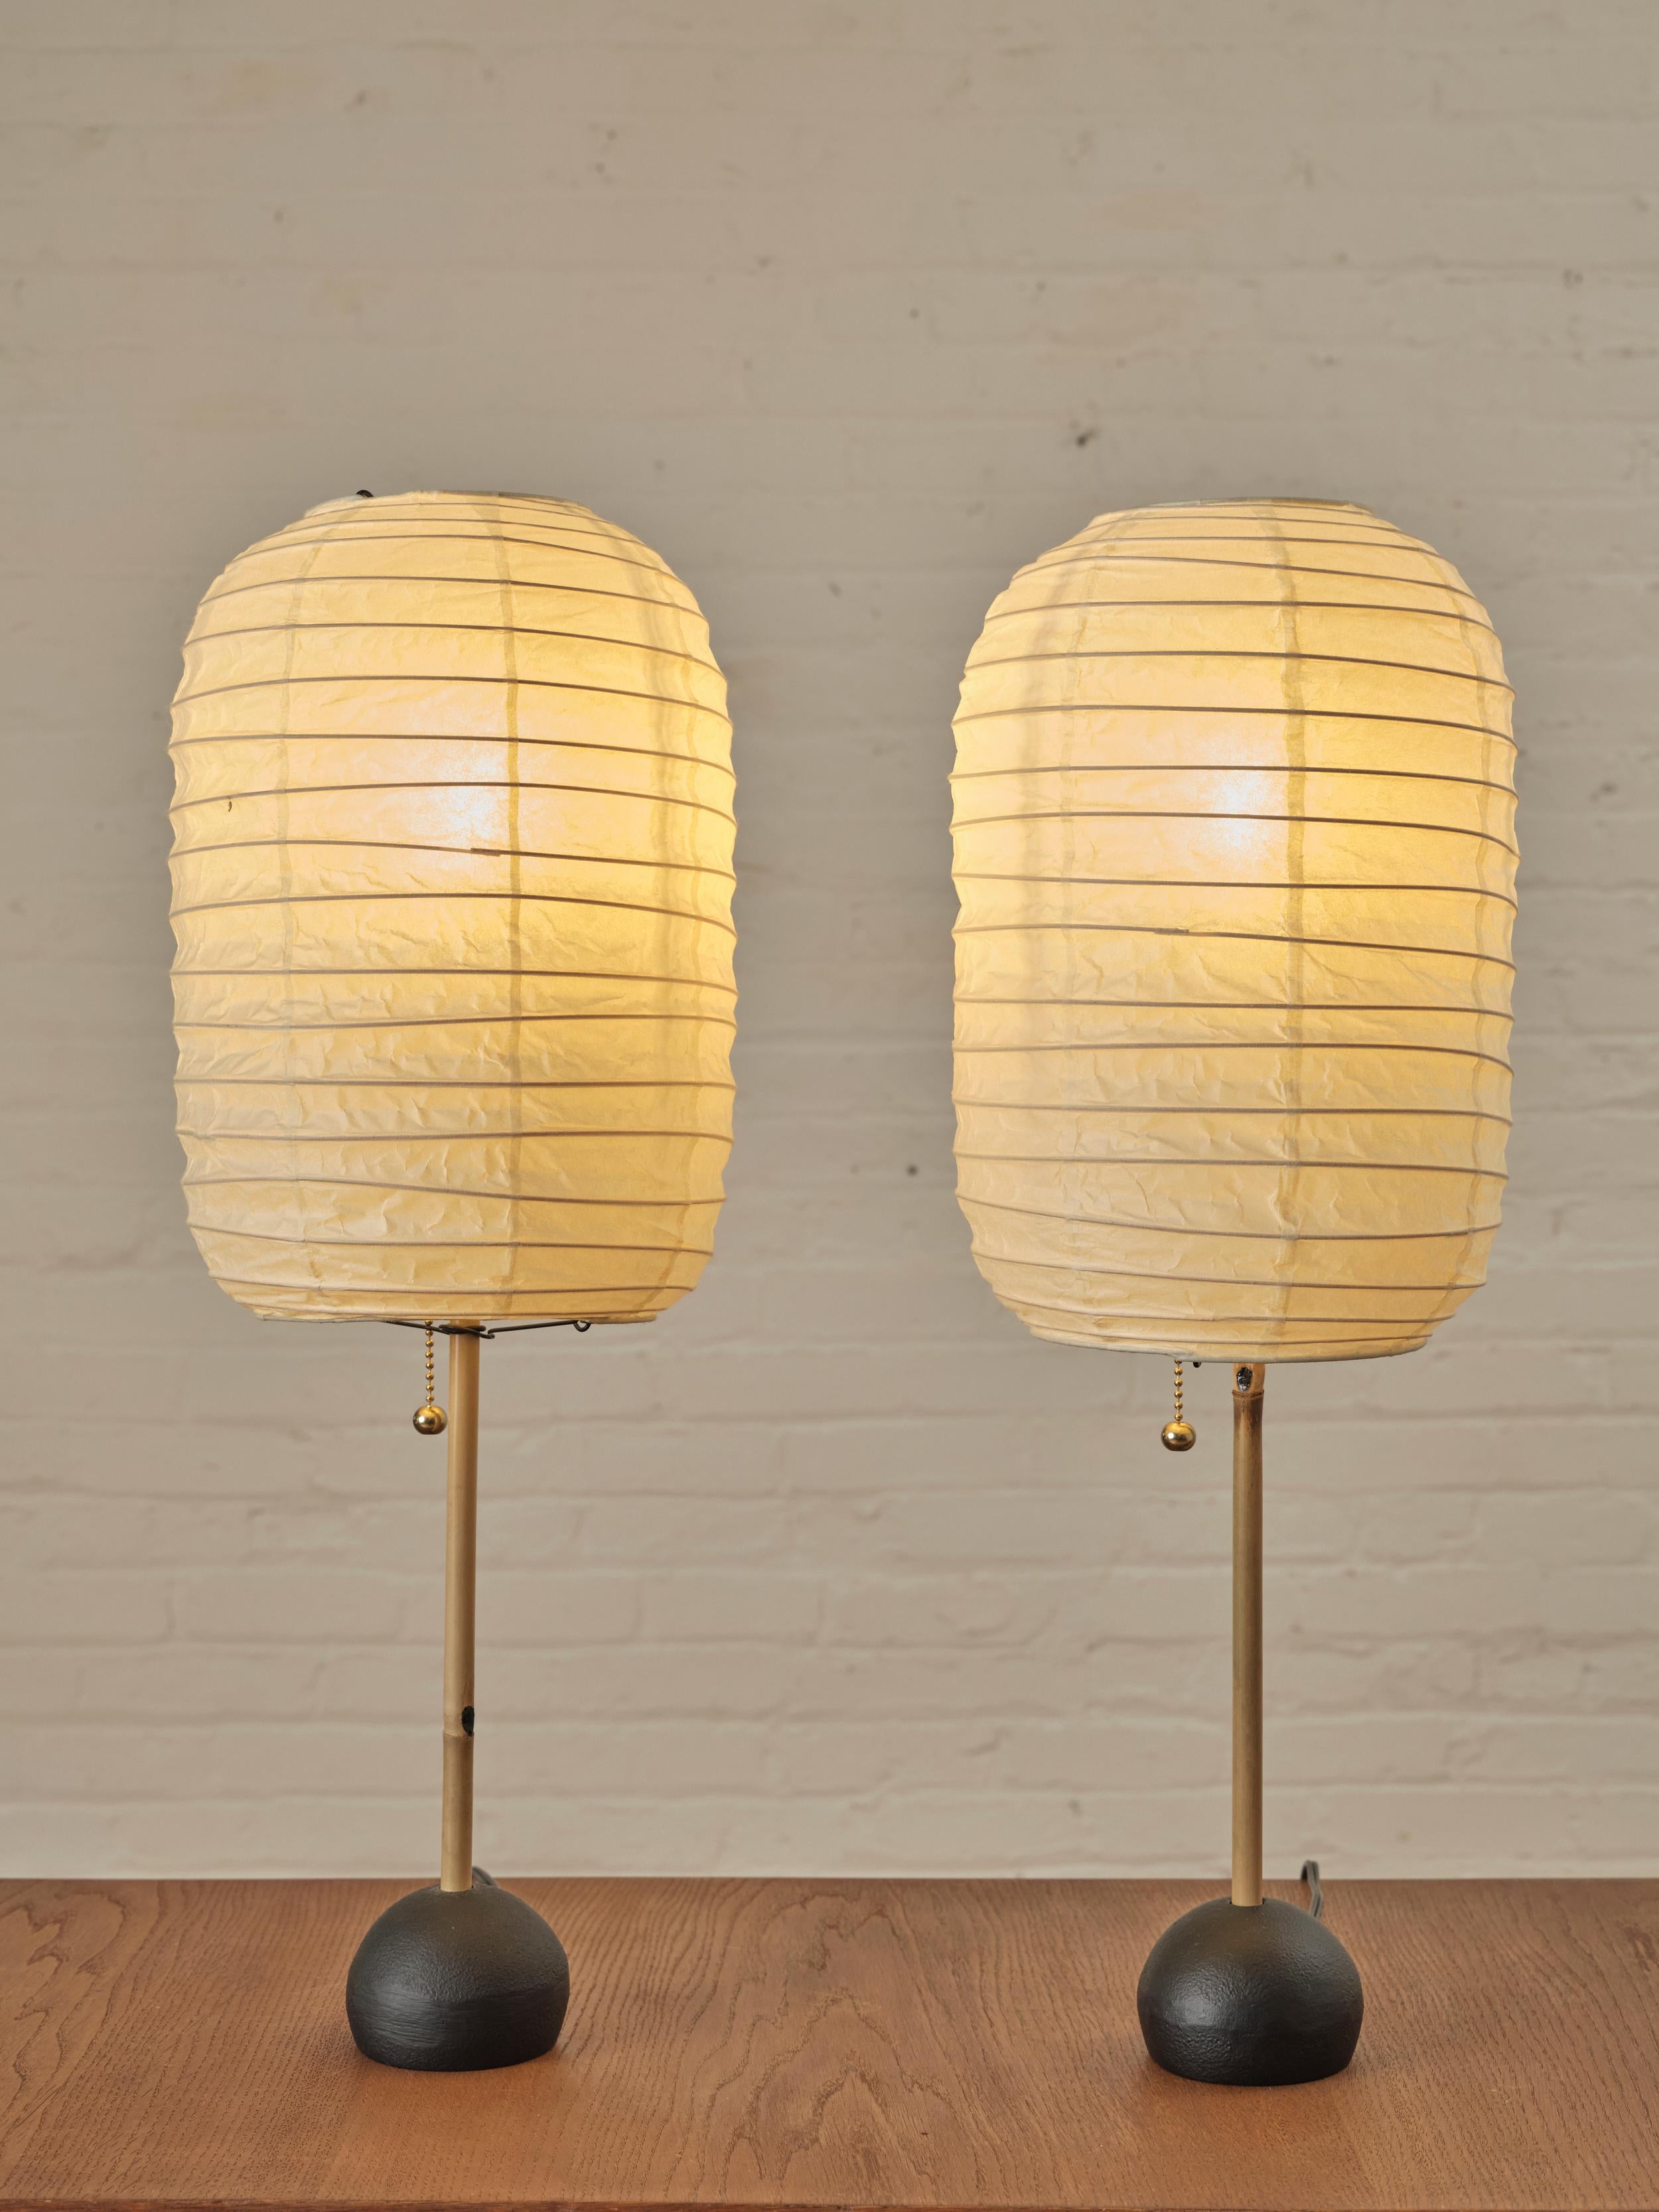 Akari BB1-30DL table lamps by Isamu Noguchi. The lamps are created from handmade washi paper and bamboo ribbing, supported by a metal frame.

About Isamu Noguchi

Isamu Noguchi (1904-1988) was a renowned Japanese-American artist and designer known